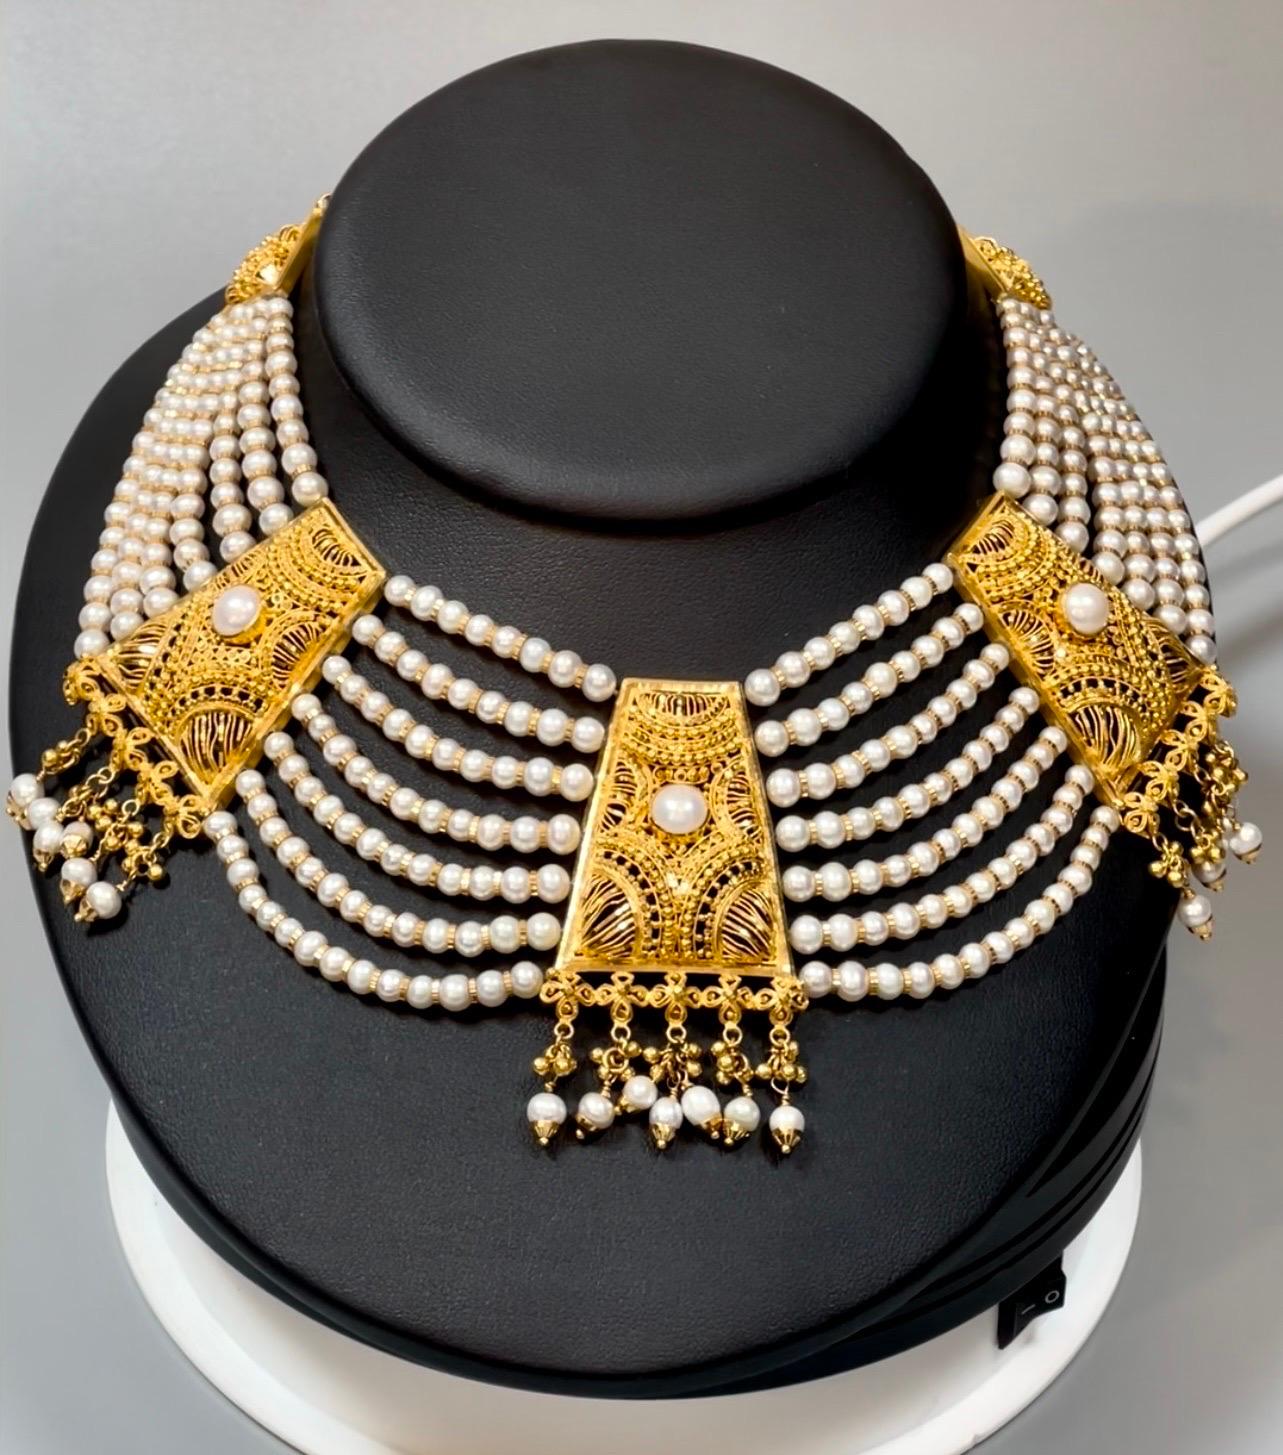 22 Karat Gold and Pearl Multi Layer Necklace Bridal Princess Necklace 4